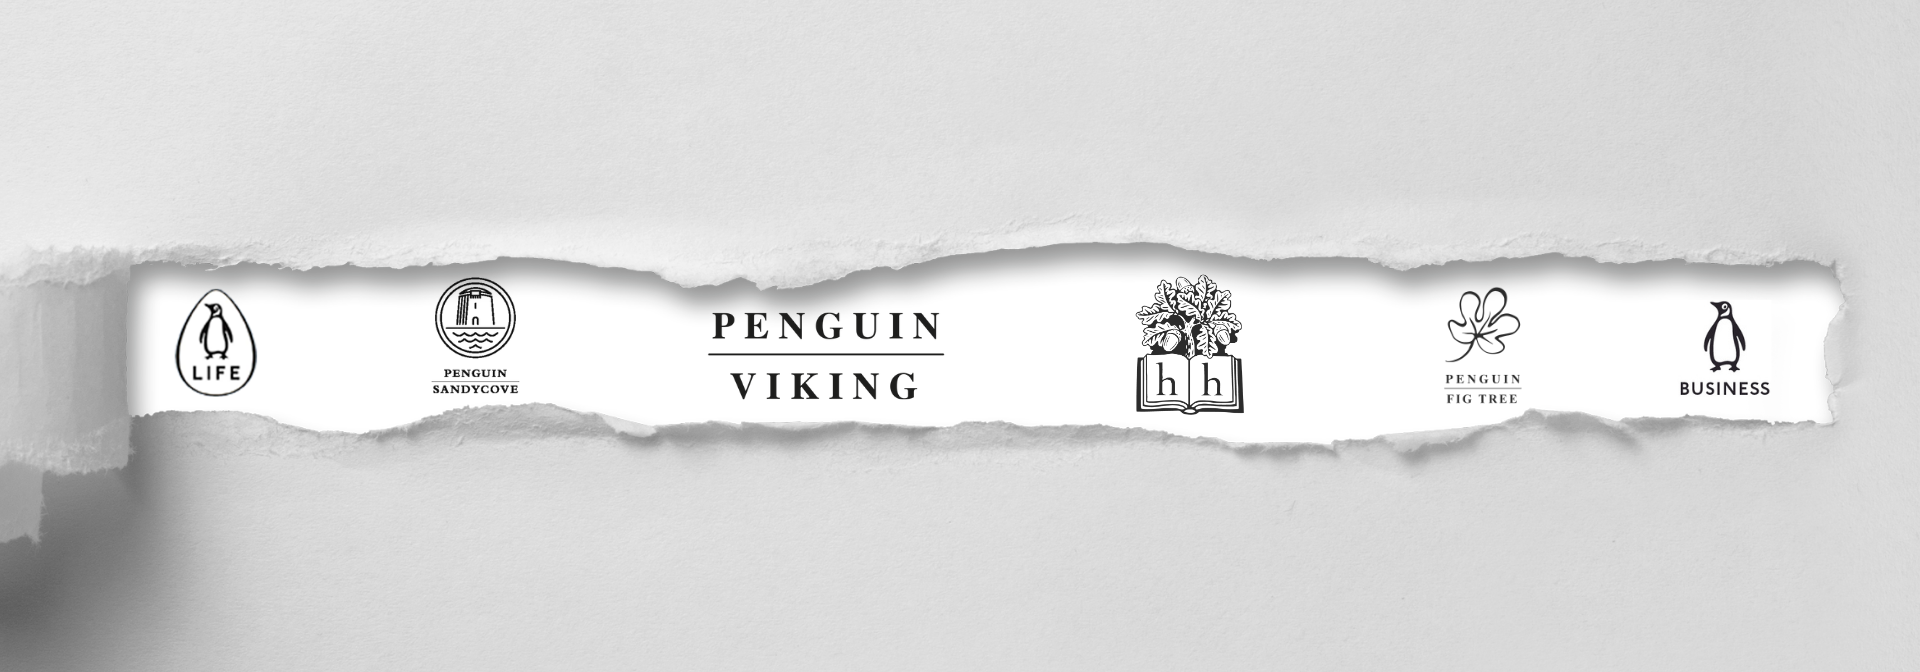 The logos for Penguin General imprints: Penguin Life, Sandycove, Viking, Hamish Hamilton, Fig Tee and Penguin Business.